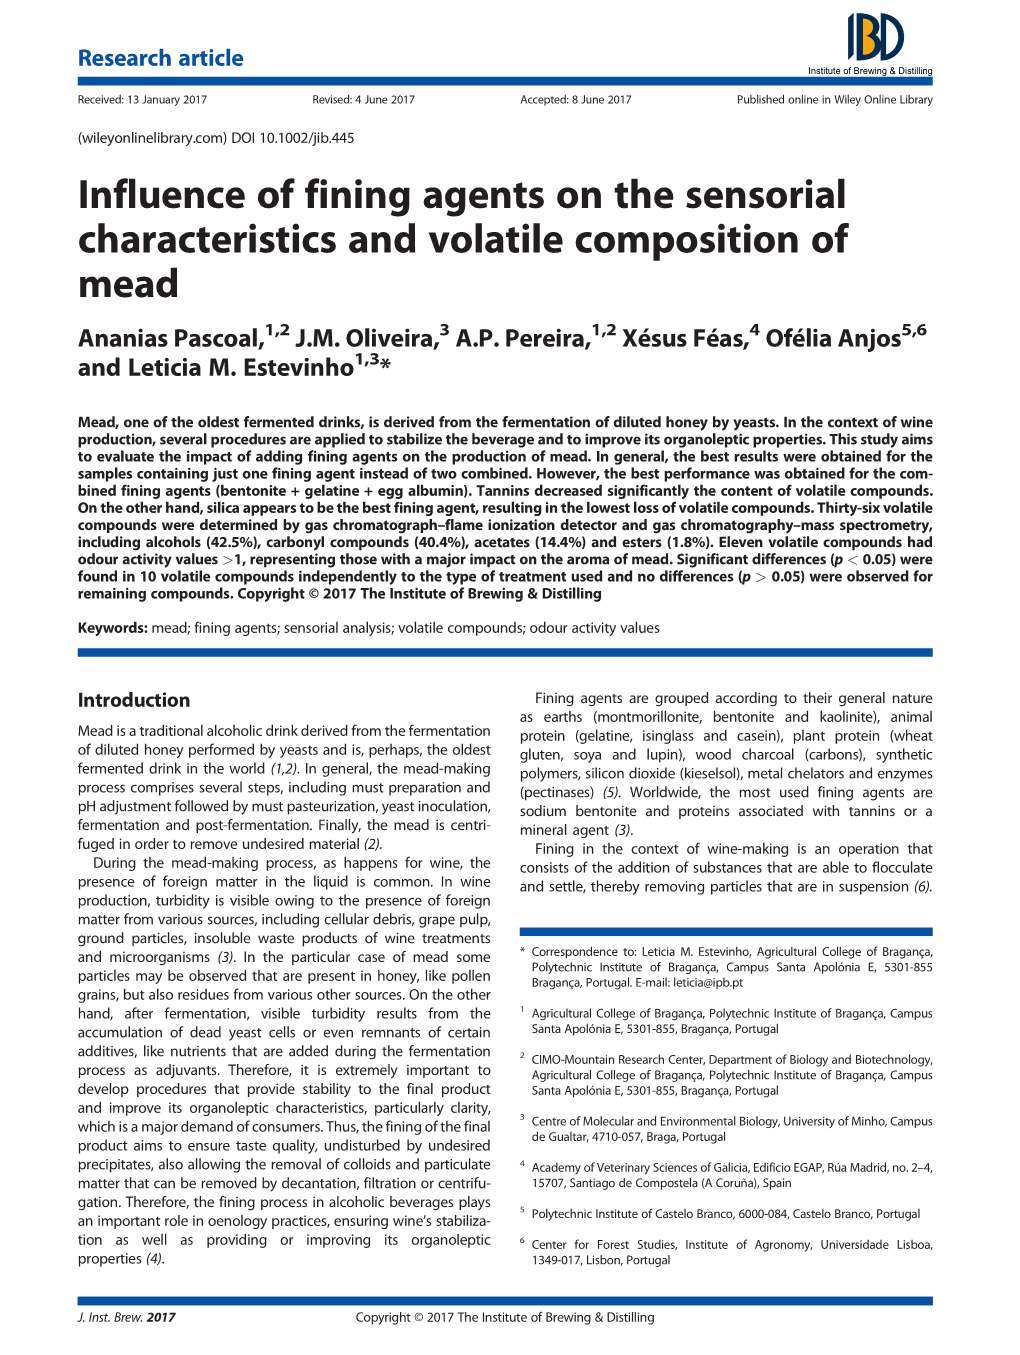 Influence of Fining Agents on the Sensorial Characteristics and Volatile Composition of Mead Ananias Pascoal,1,2 J.M